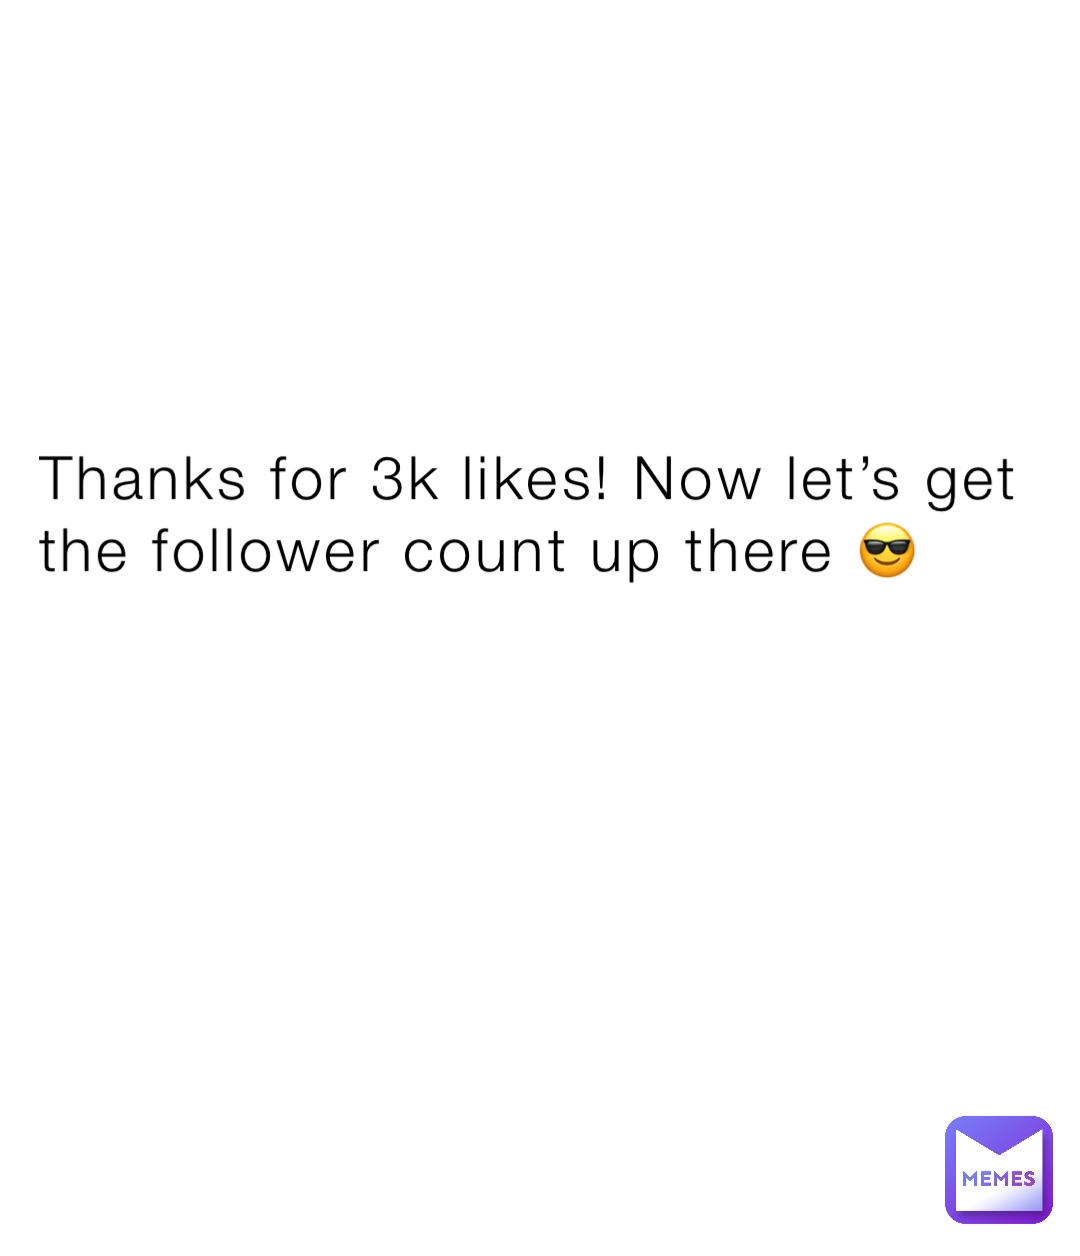 Thanks for 3k likes! Now let’s get the follower count up there 😎